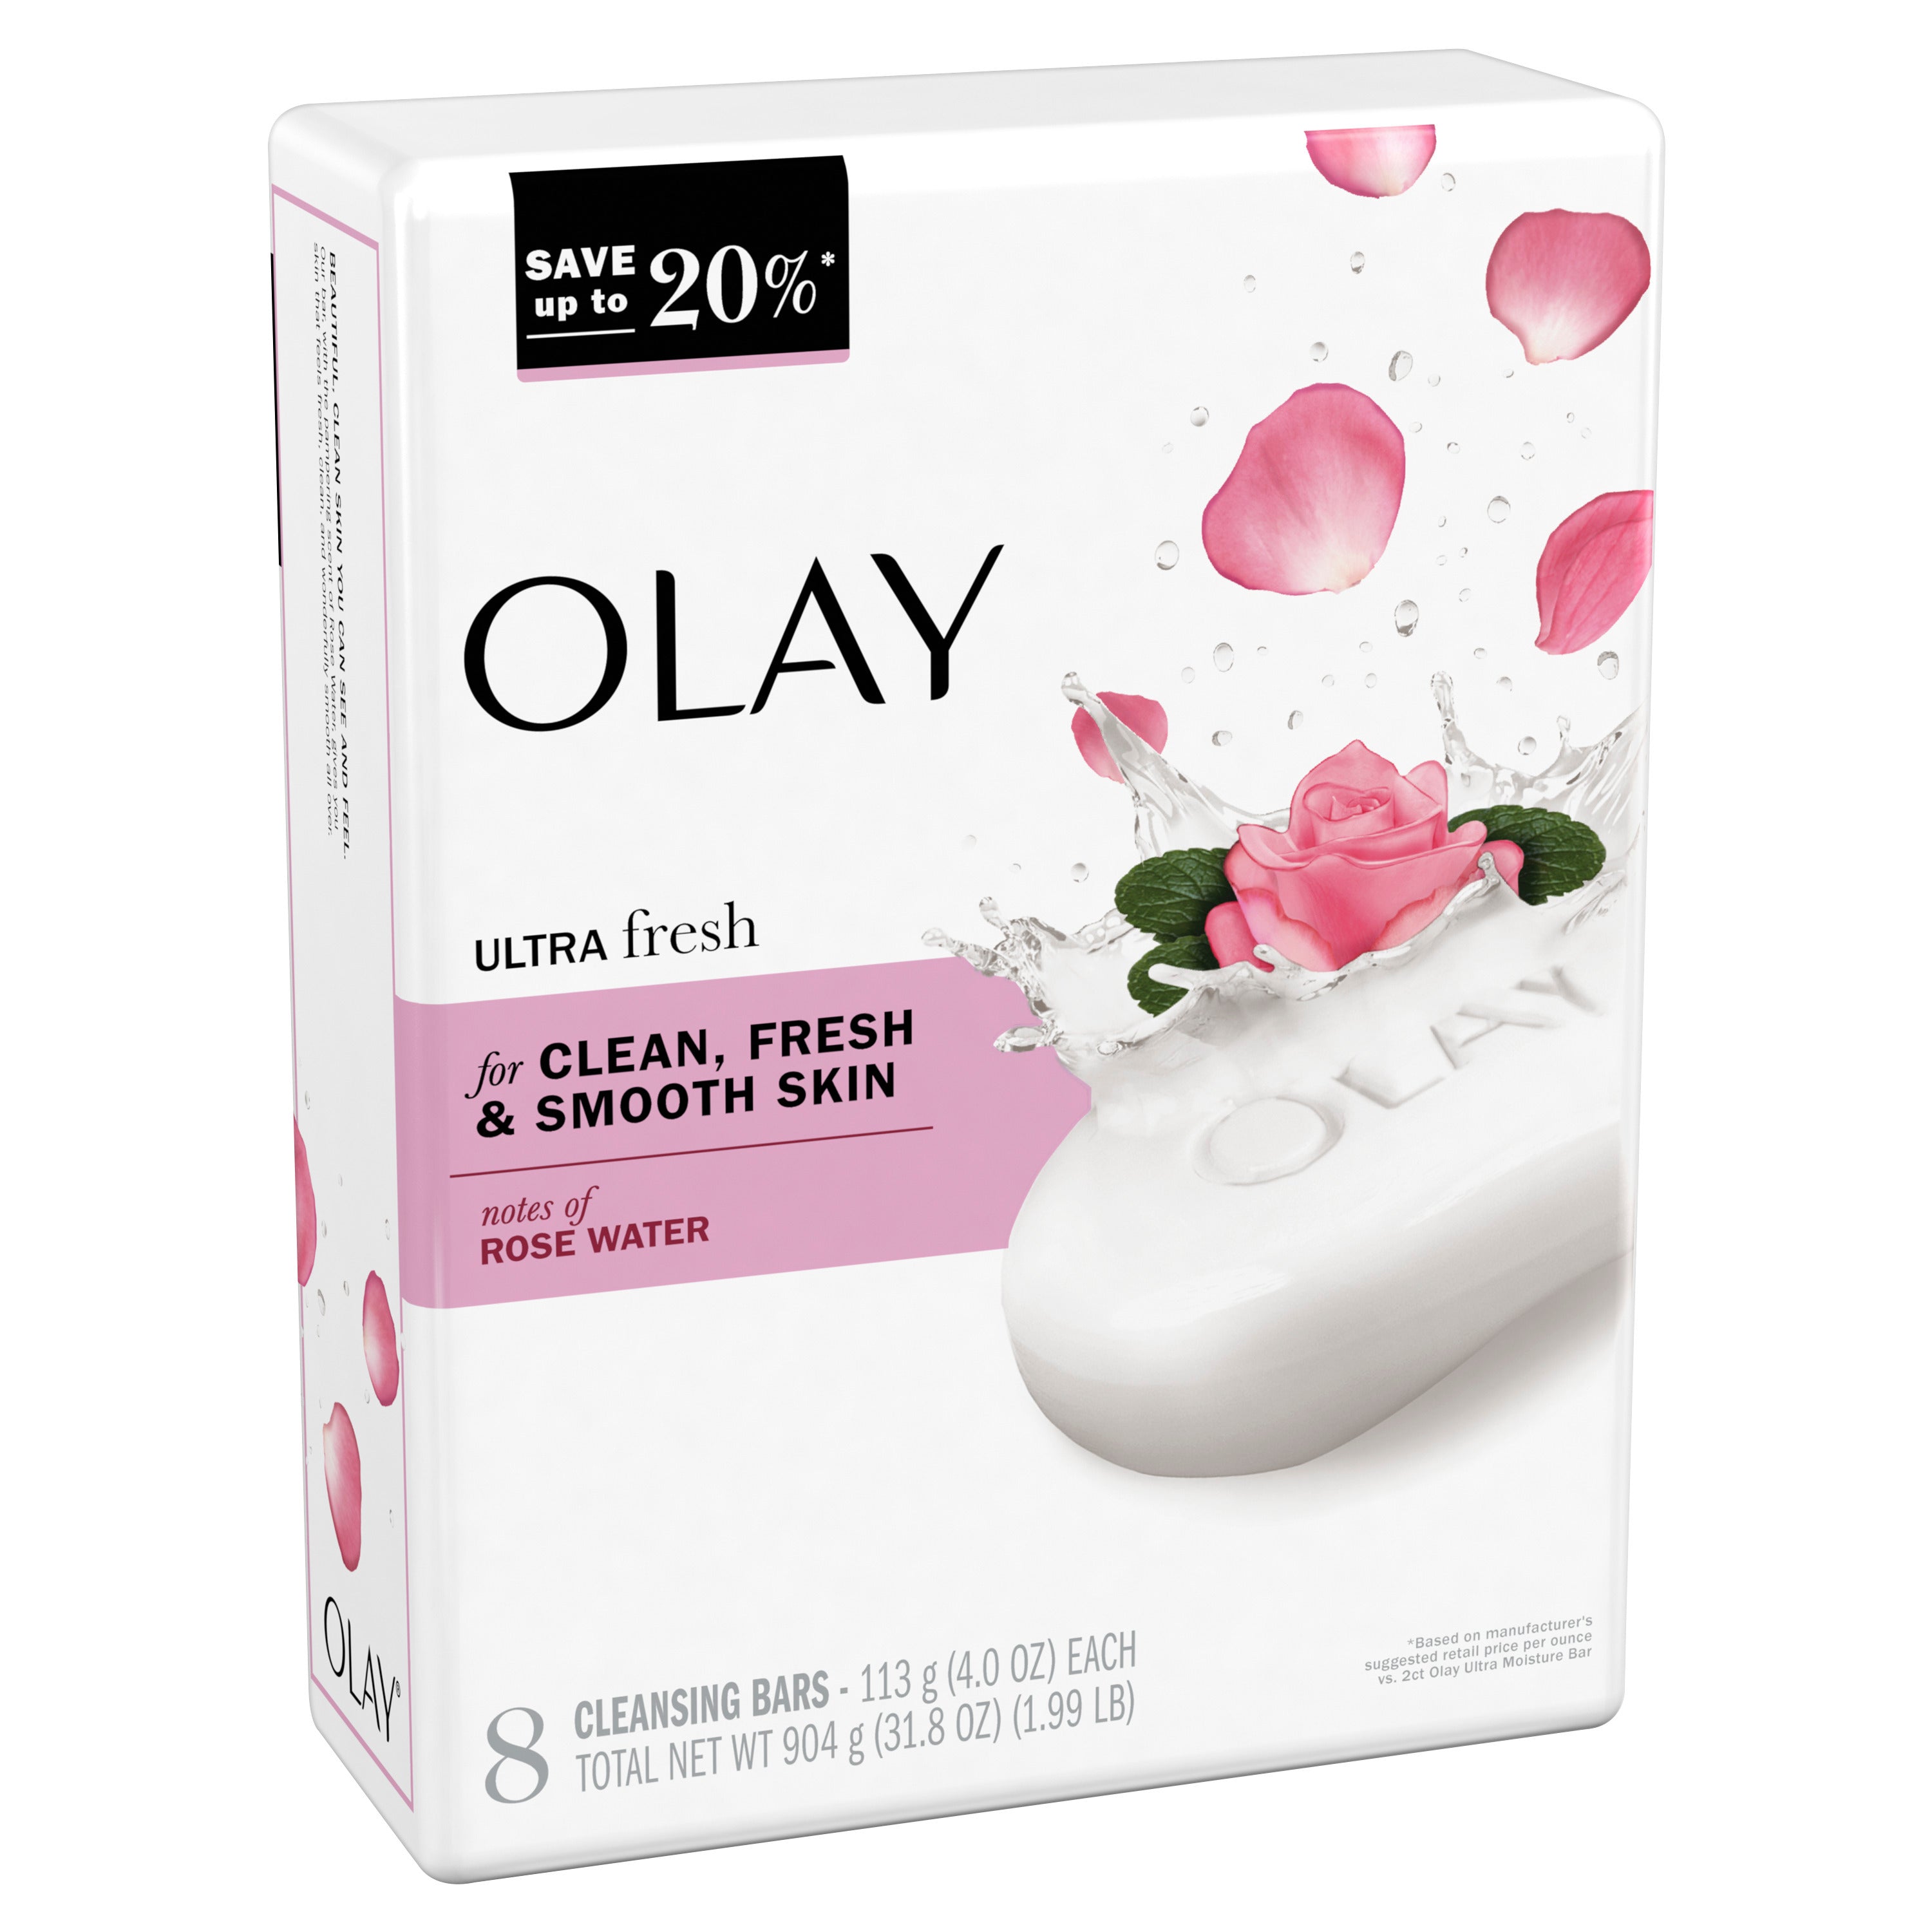 Olay Bath Bar with Notes of Rosewater 4 oz, 8 Count | MTTS337